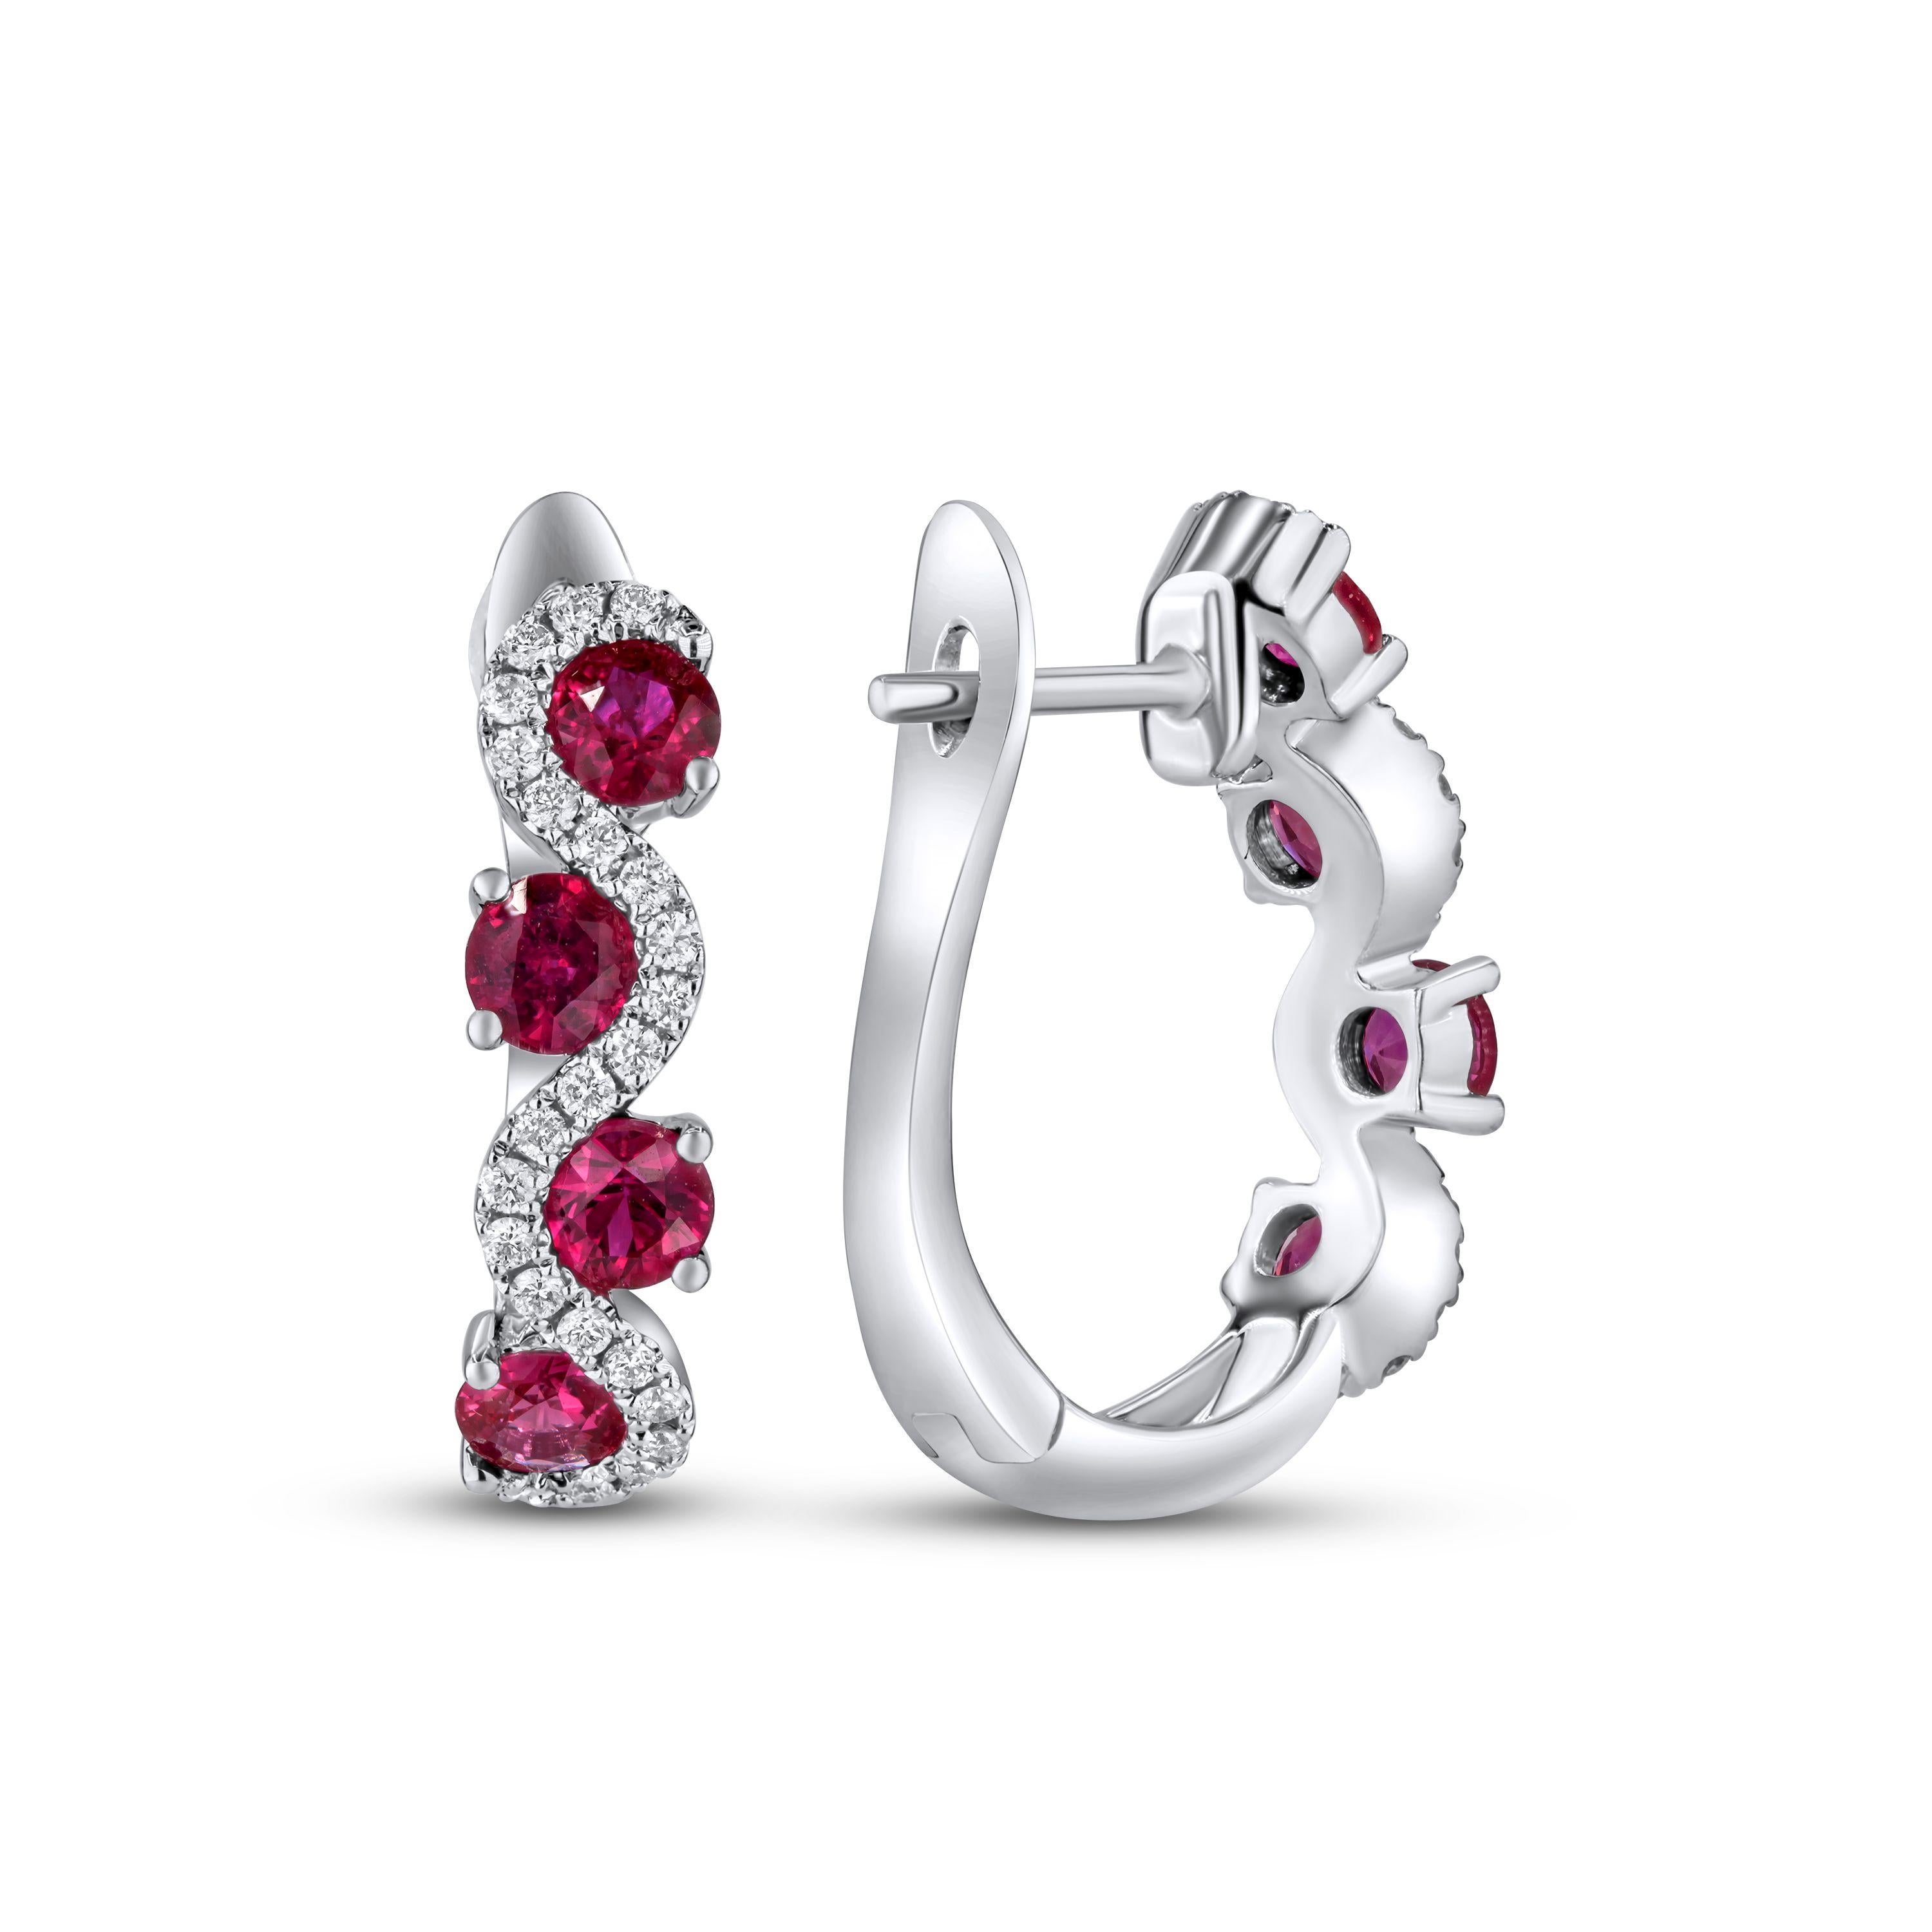 The centerpiece of these earrings is the 1.45 carats of round rubies, each one meticulously selected to radiate a deep, passionate red hue. These vibrant gemstones are perfectly nestled within a delicate wave of round natural diamonds, totaling 0.21